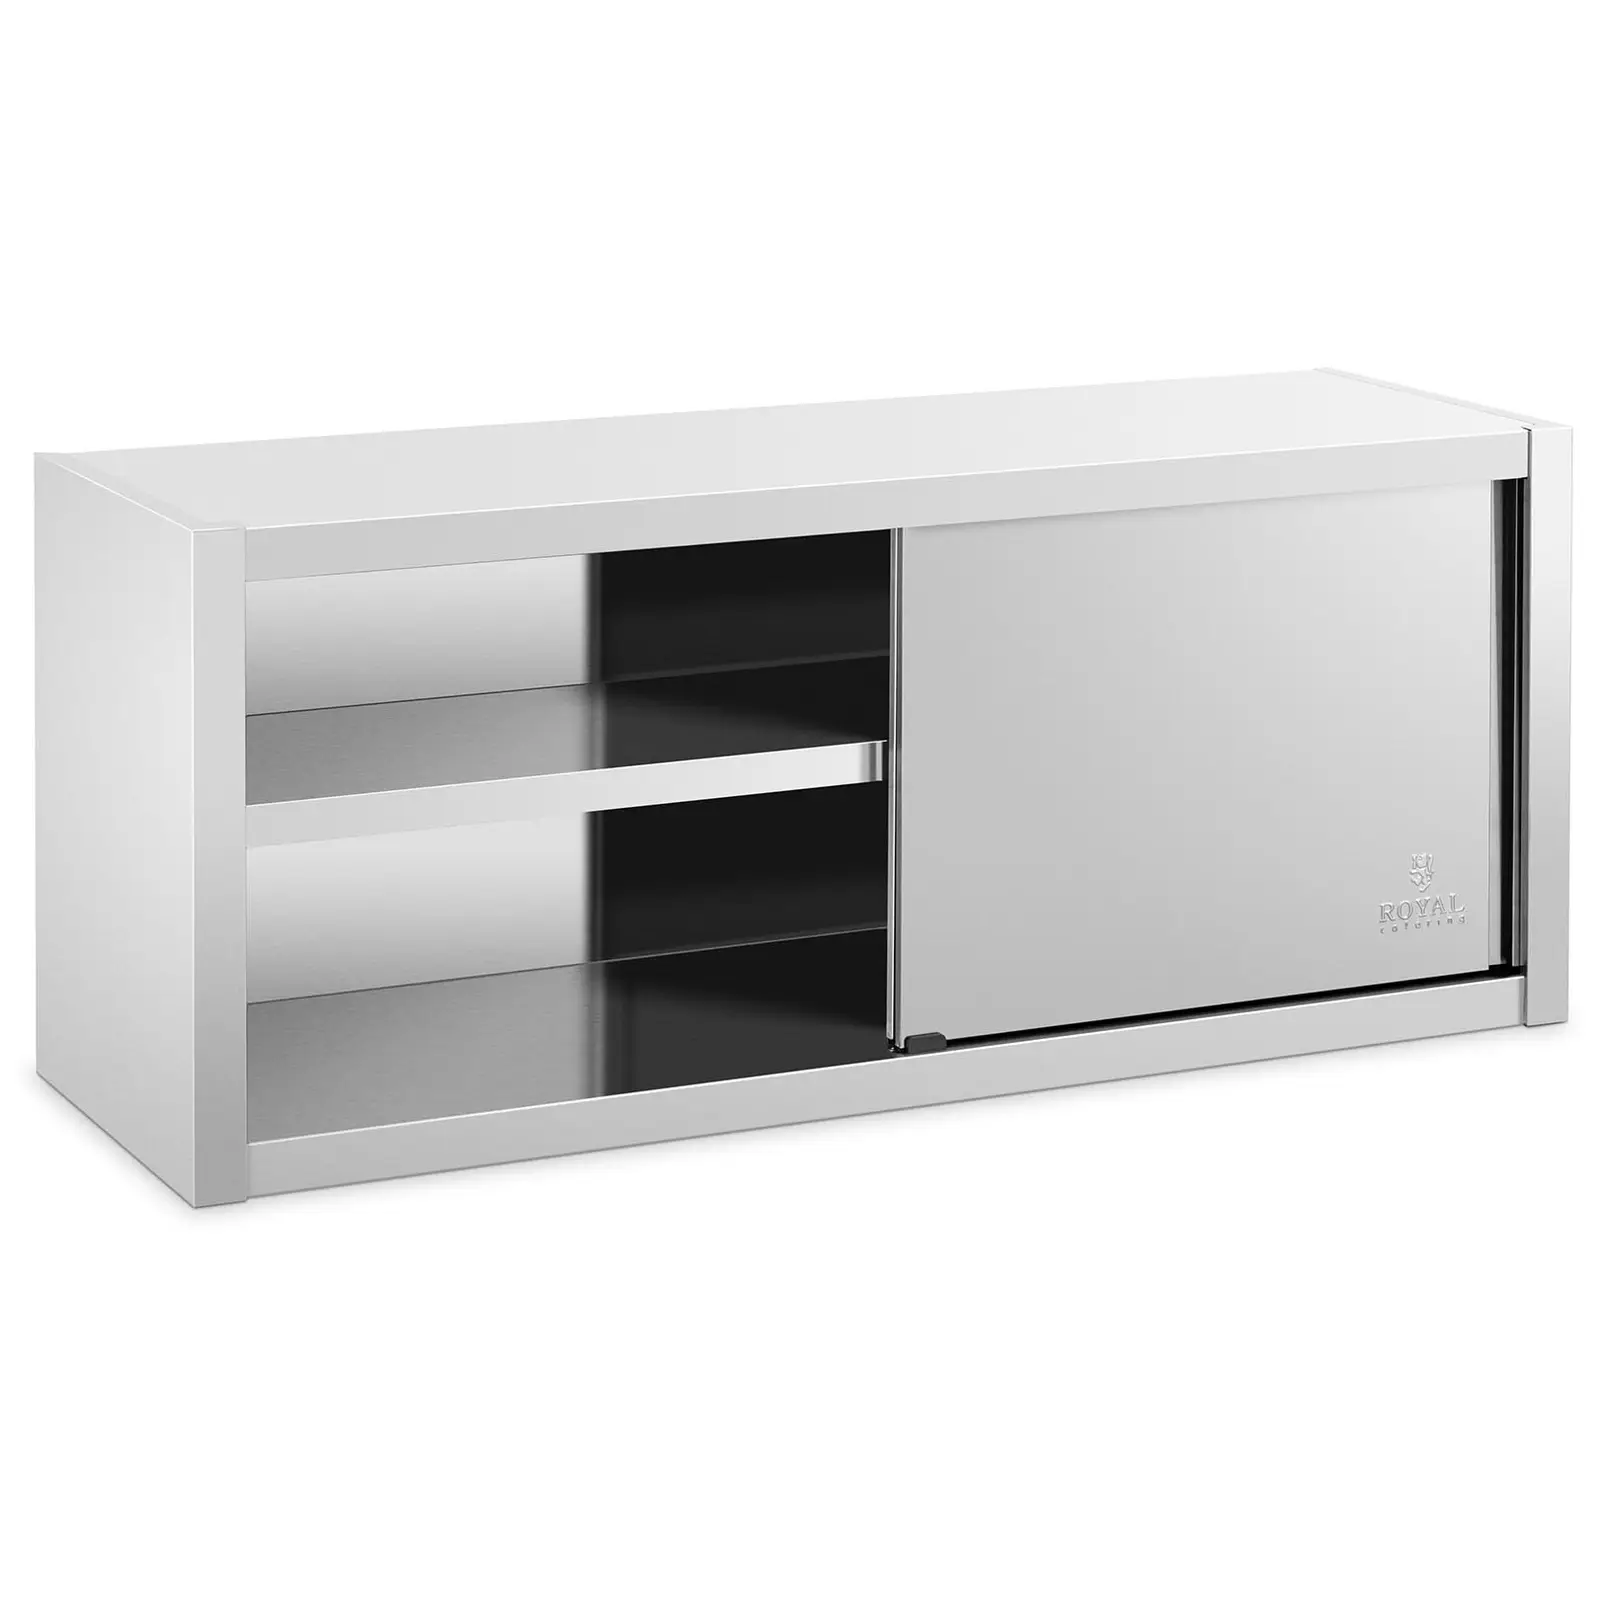 Stainless Steel Hanging Cabinet - 140 x 45 cm